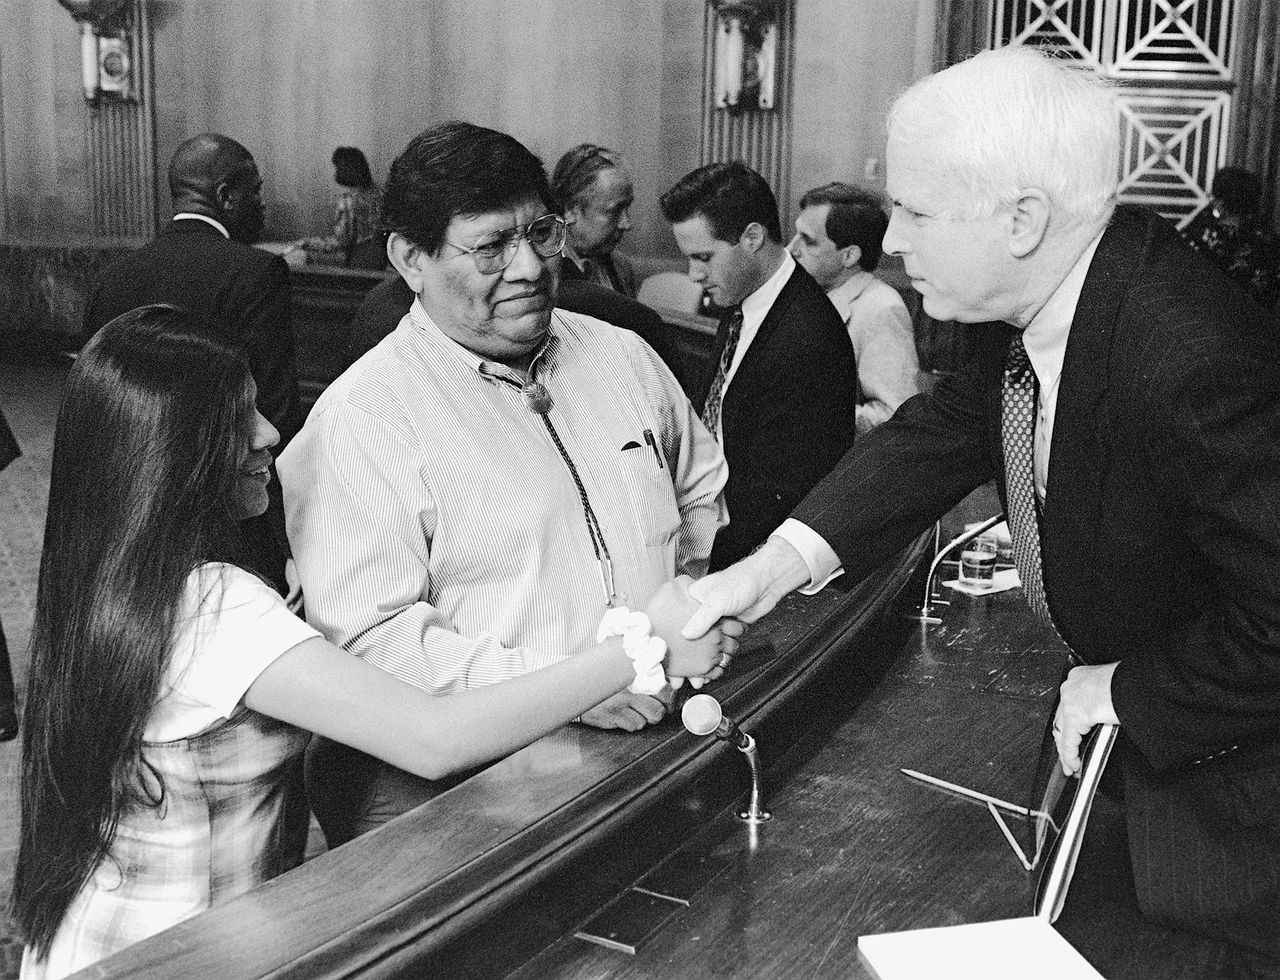 John McCain shakes hands with a young Tohono O'Odham tribal member at a Senate Committee on Indian Affairs meeting.